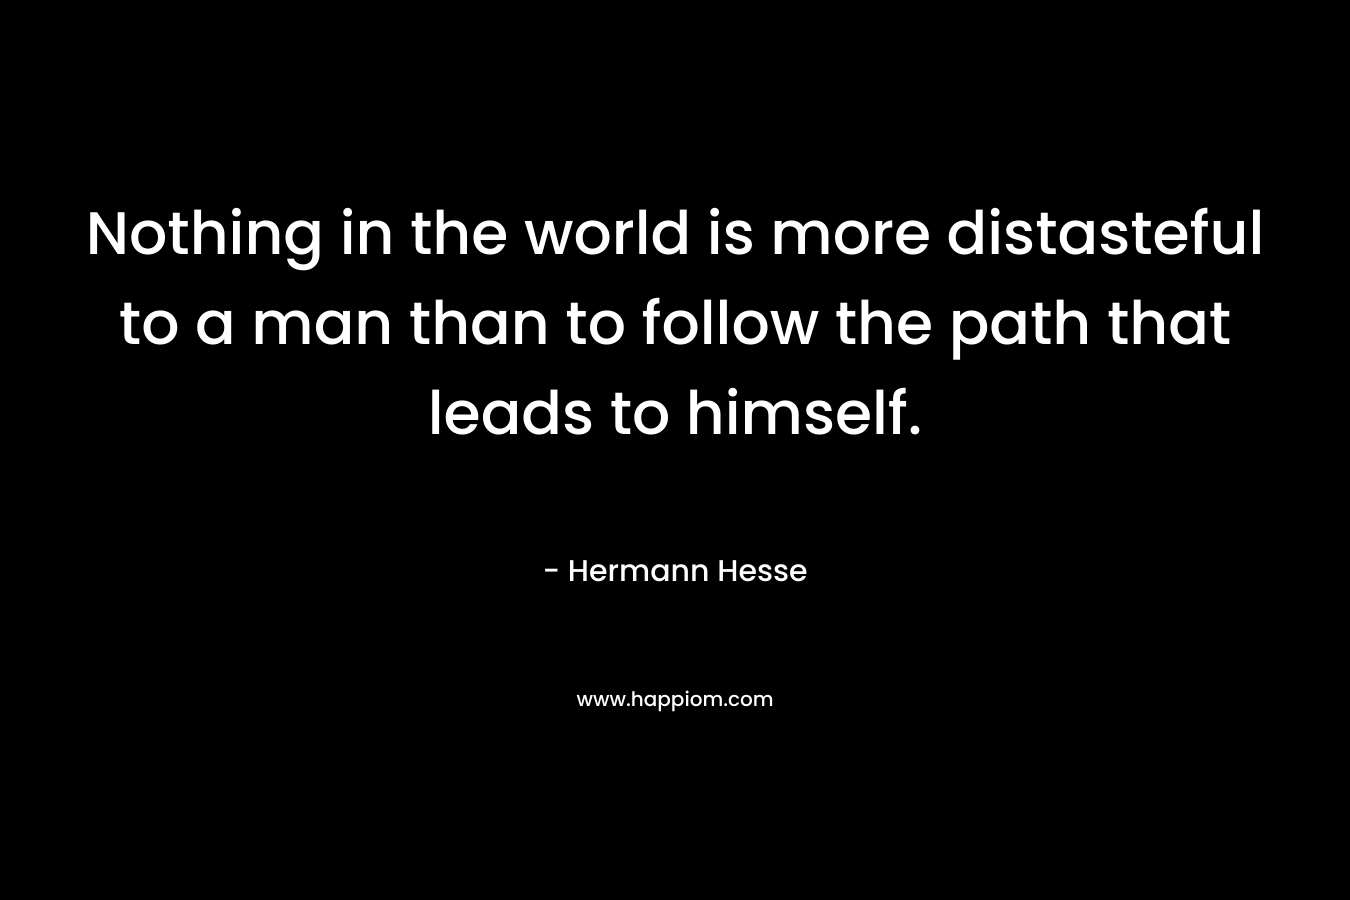 Nothing in the world is more distasteful to a man than to follow the path that leads to himself.